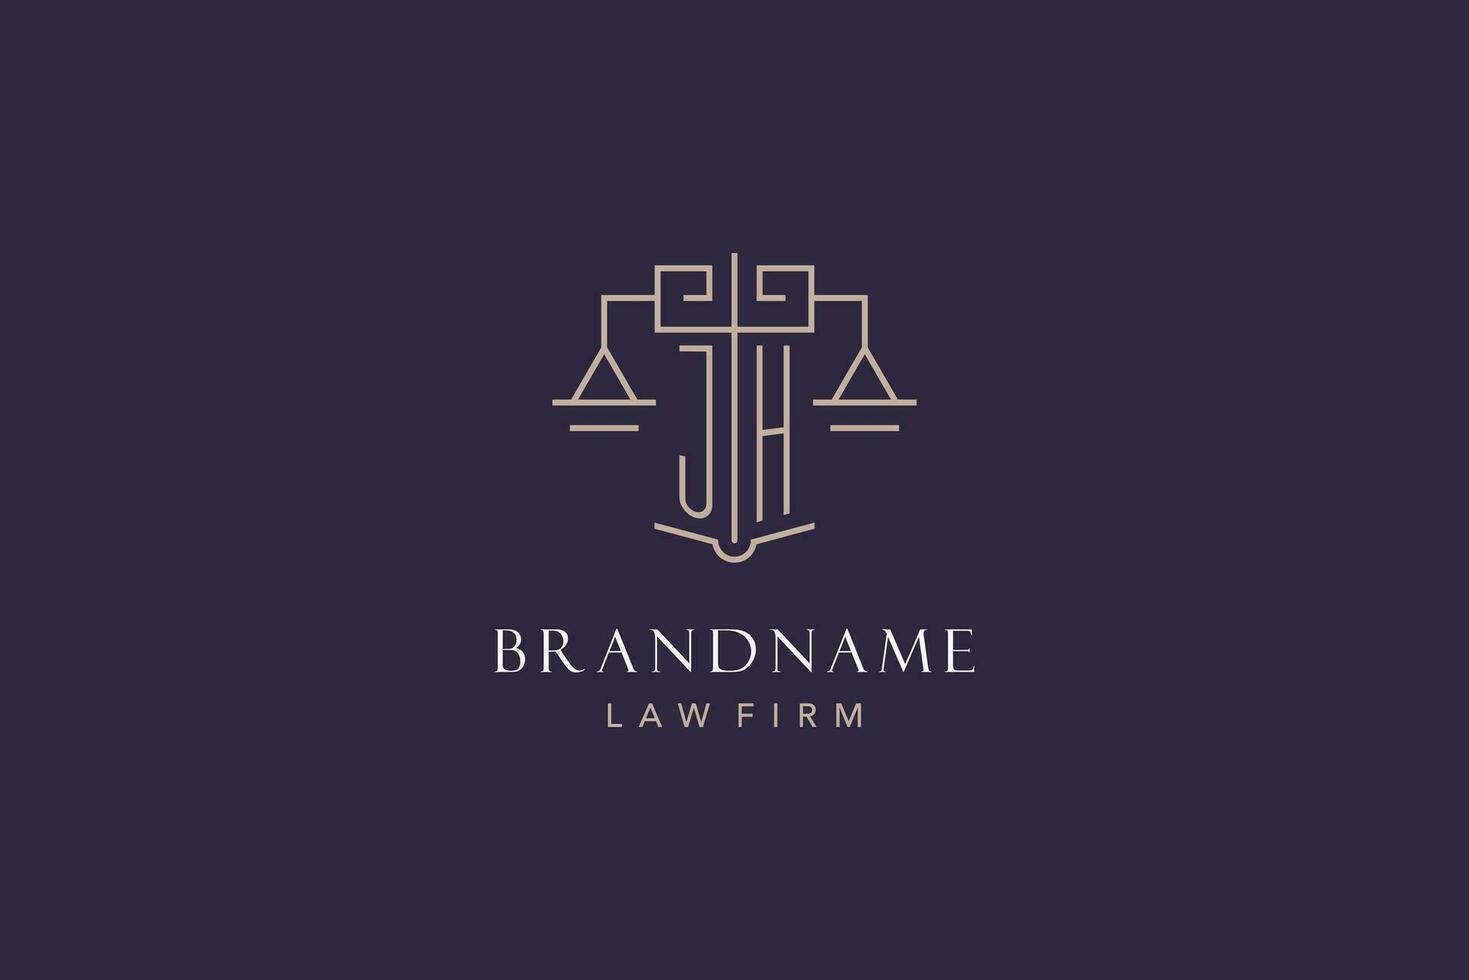 Initial letter JH logo with scale of justice logo design, luxury legal logo geometric style vector